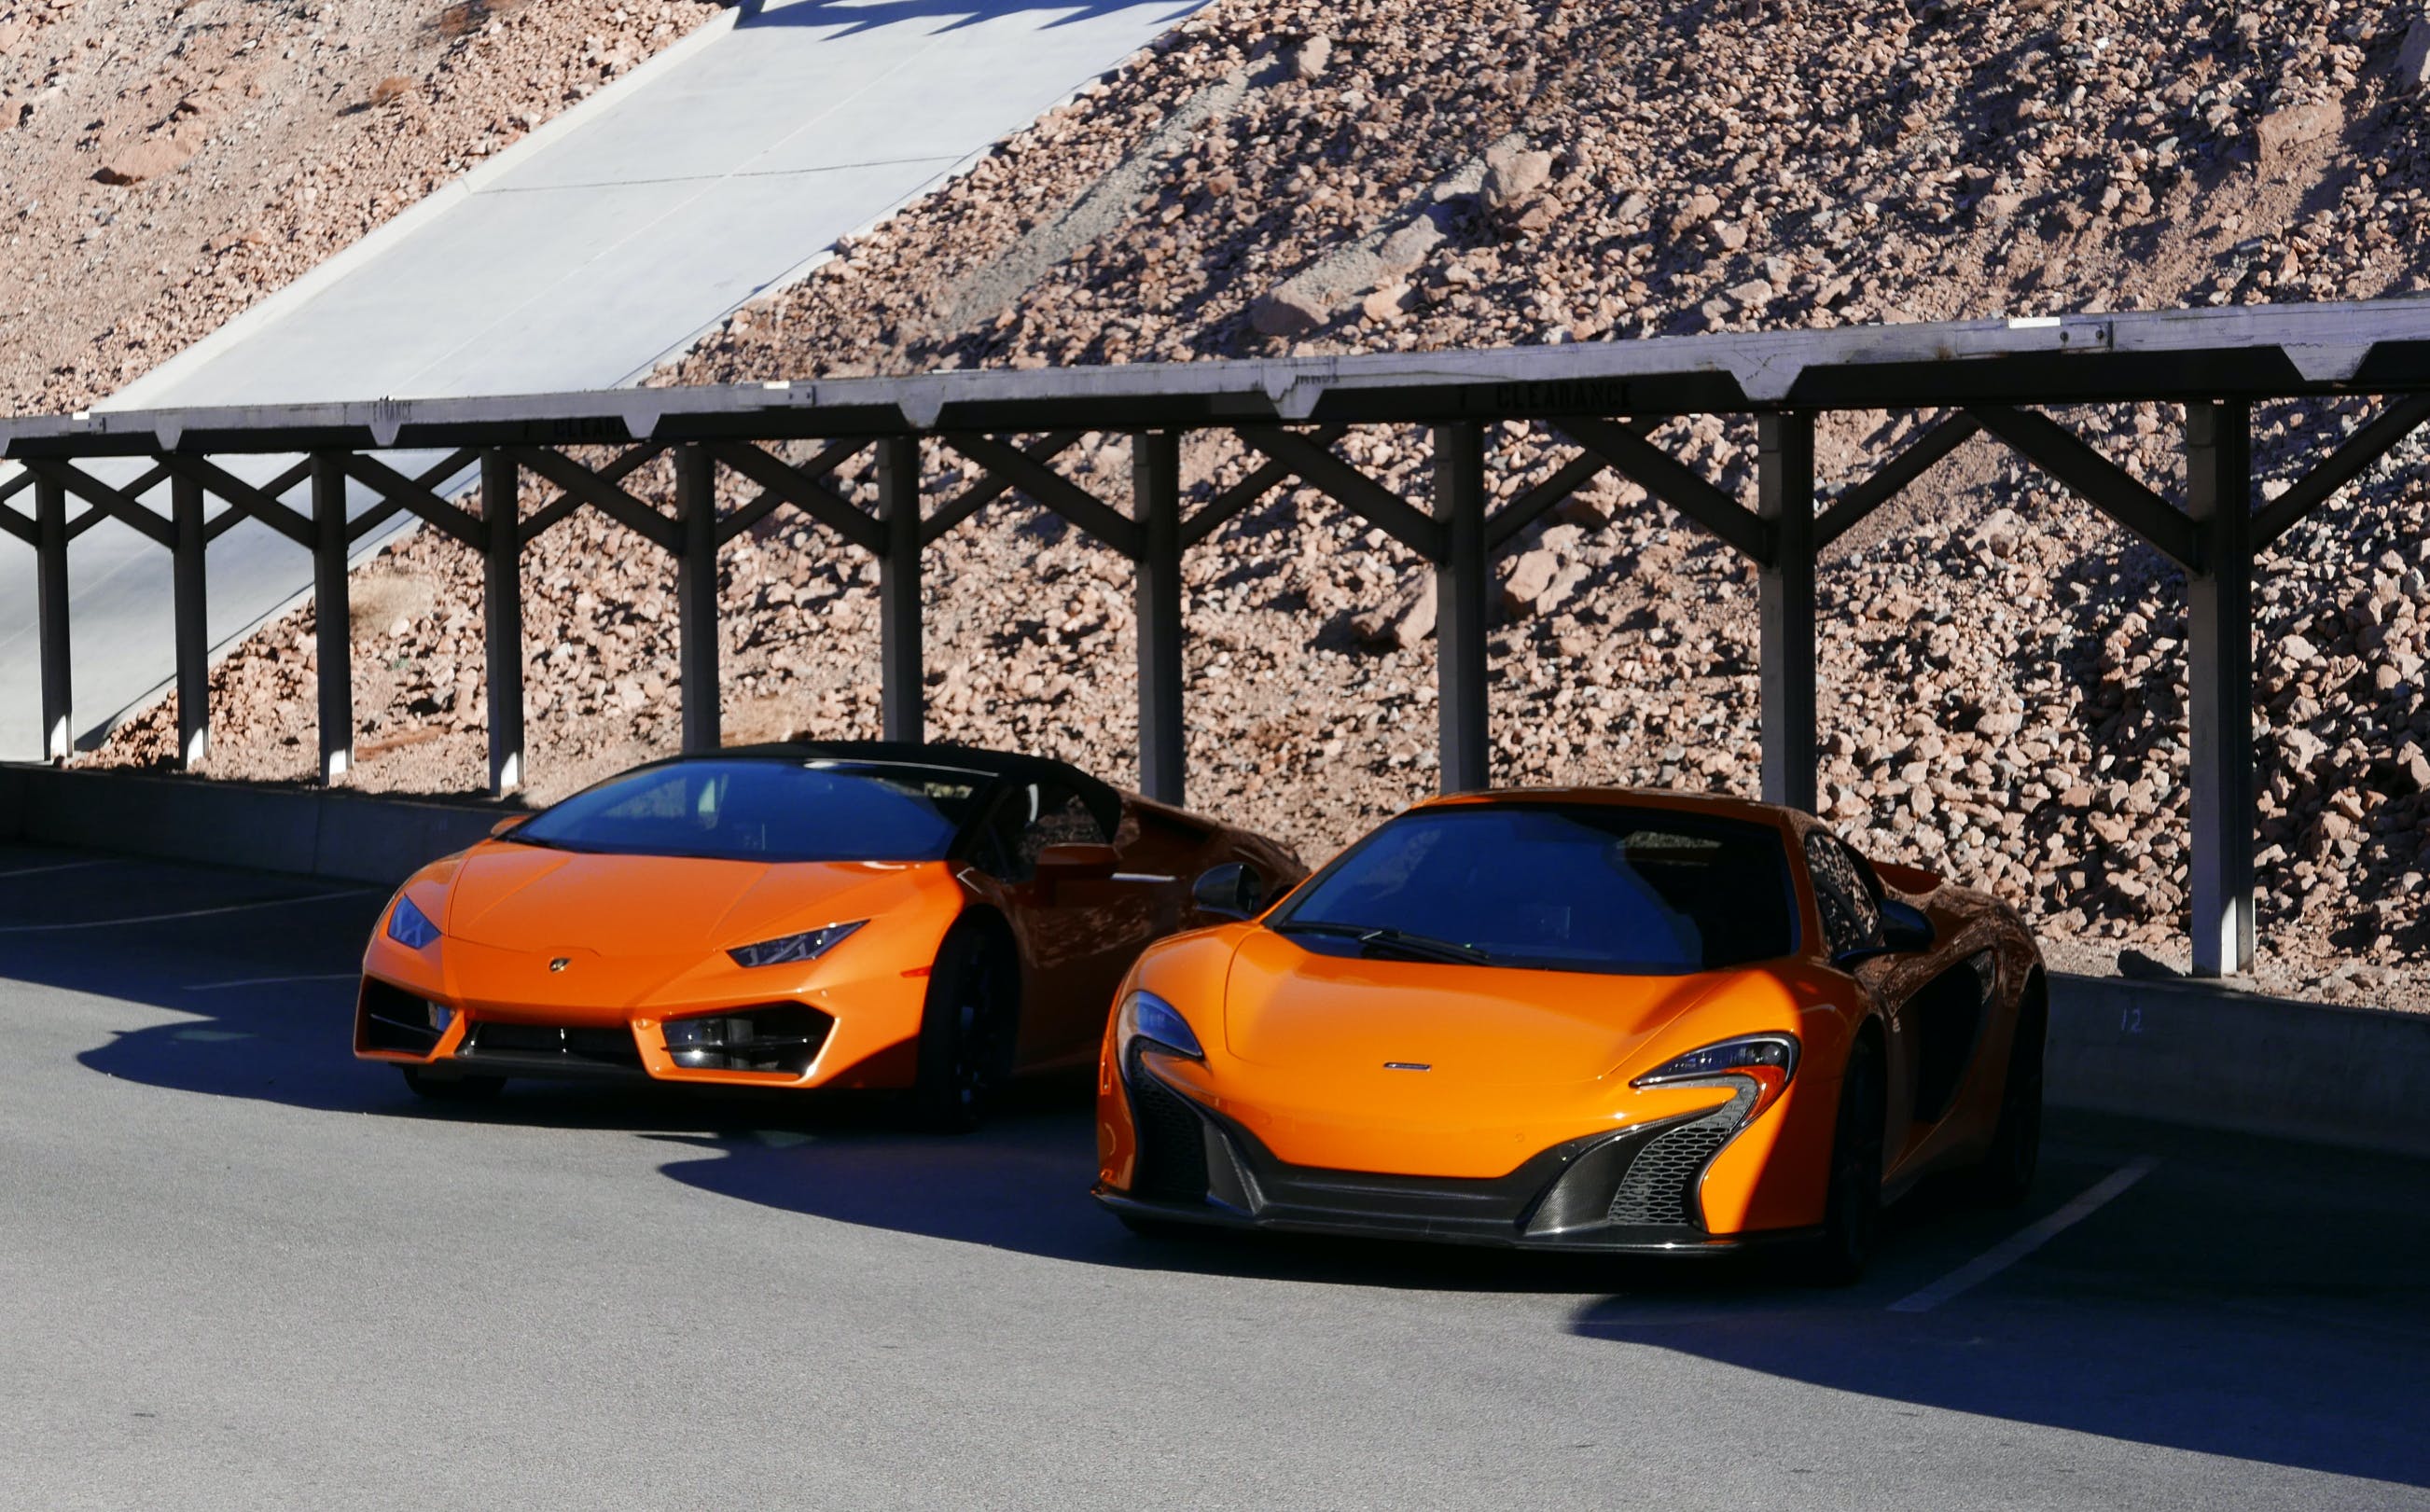 Two orange sports cars at a parking lot